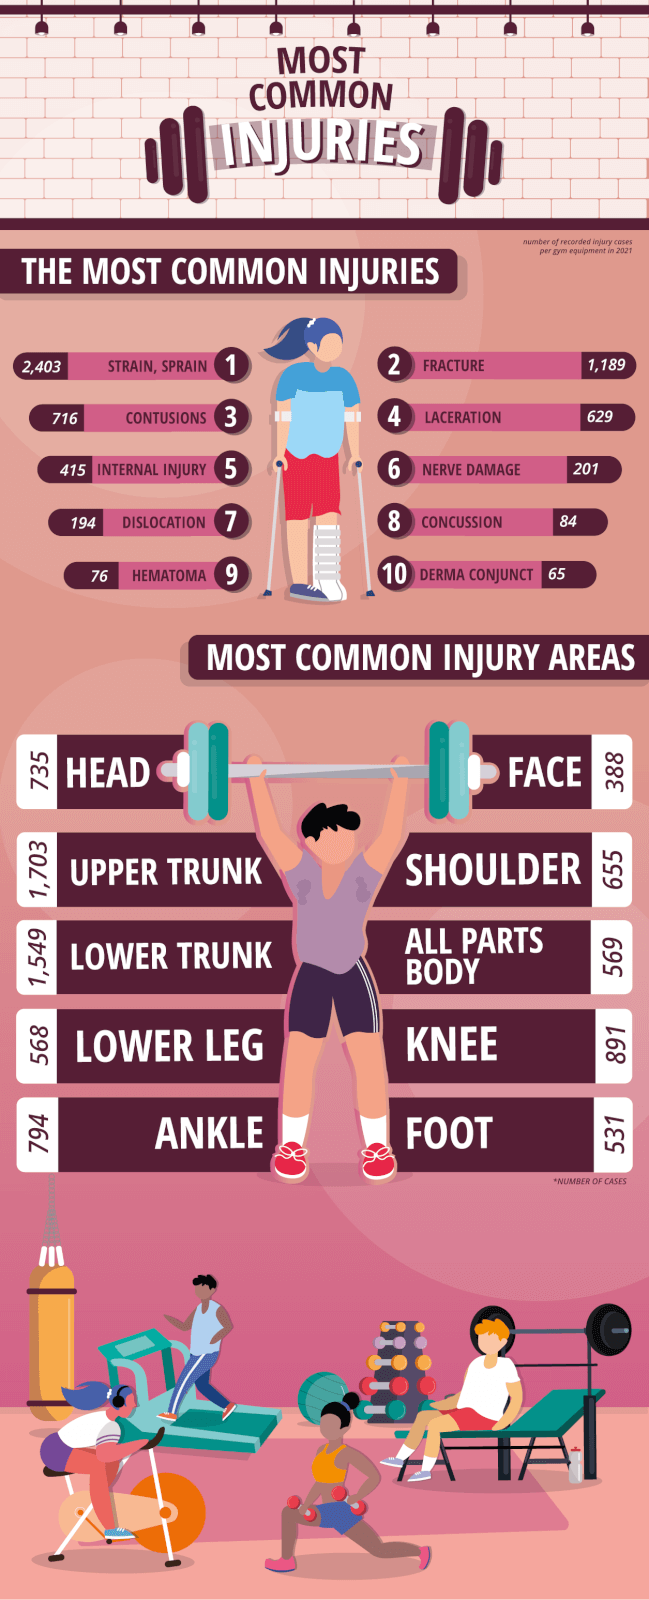 Image showing the most common injuries at gyms, including strains and sprains, fractures and contusions.